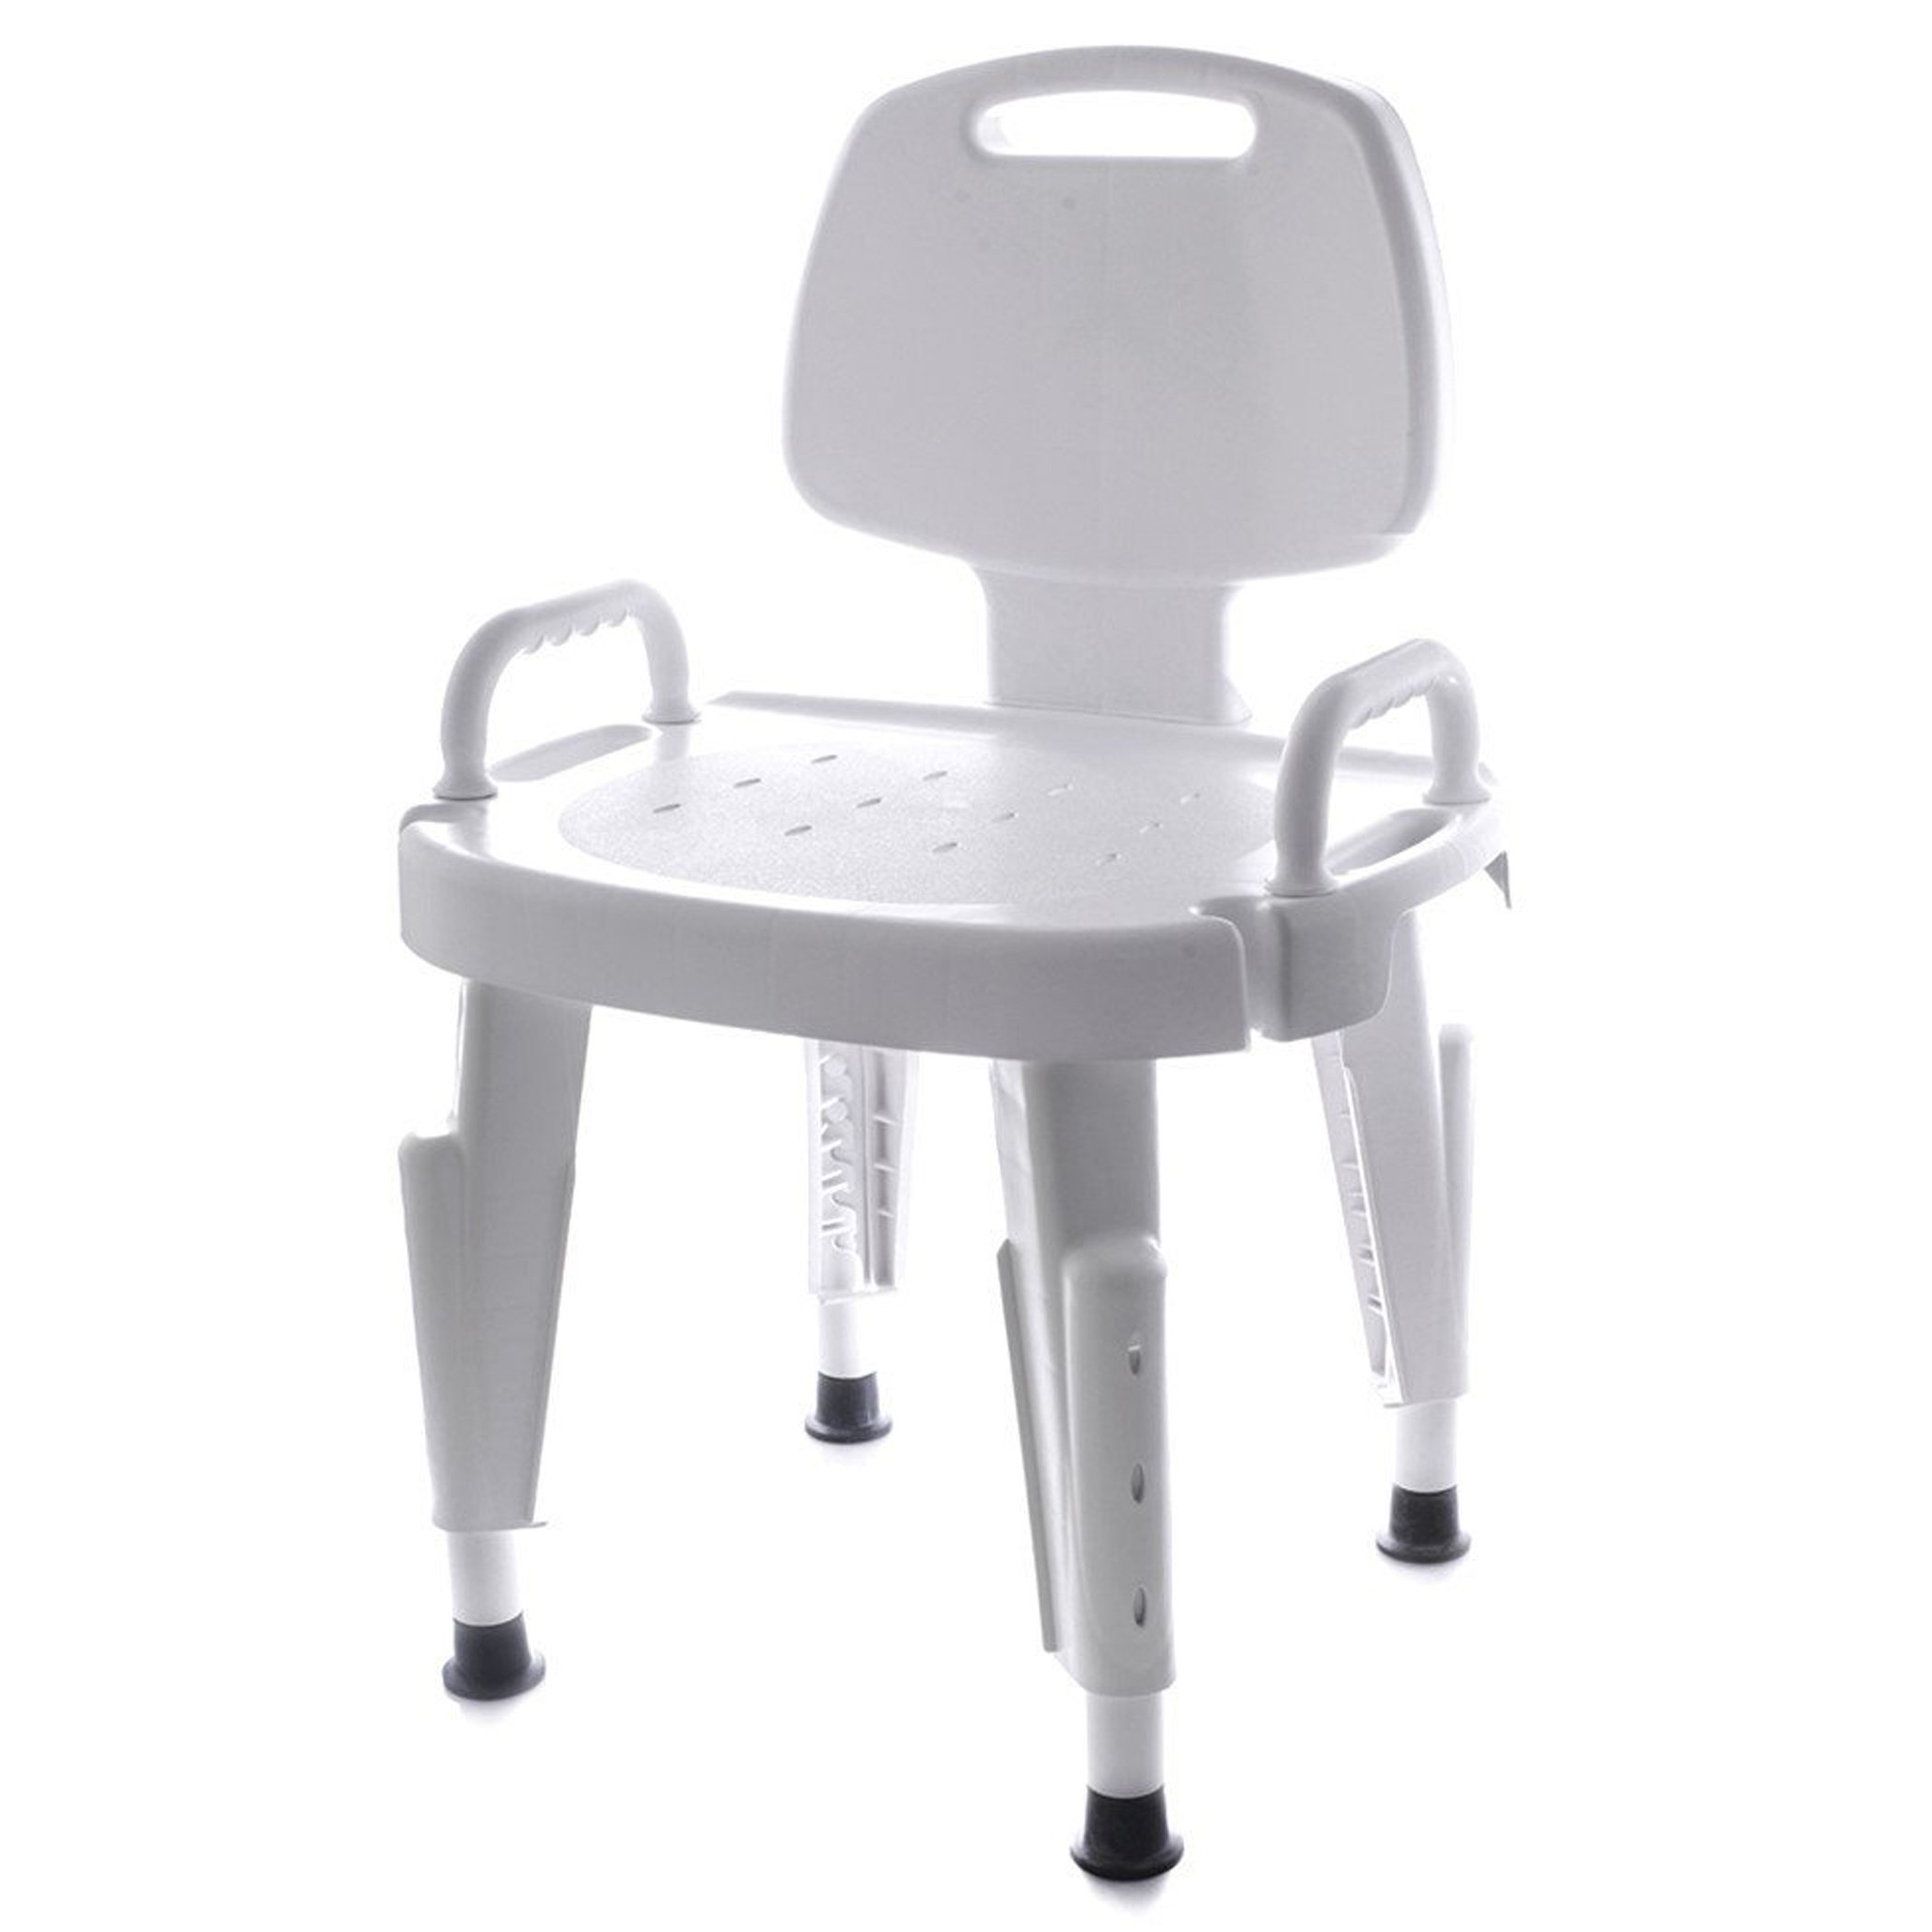 Maddak Adjustable Shower Seat with Arms and Back